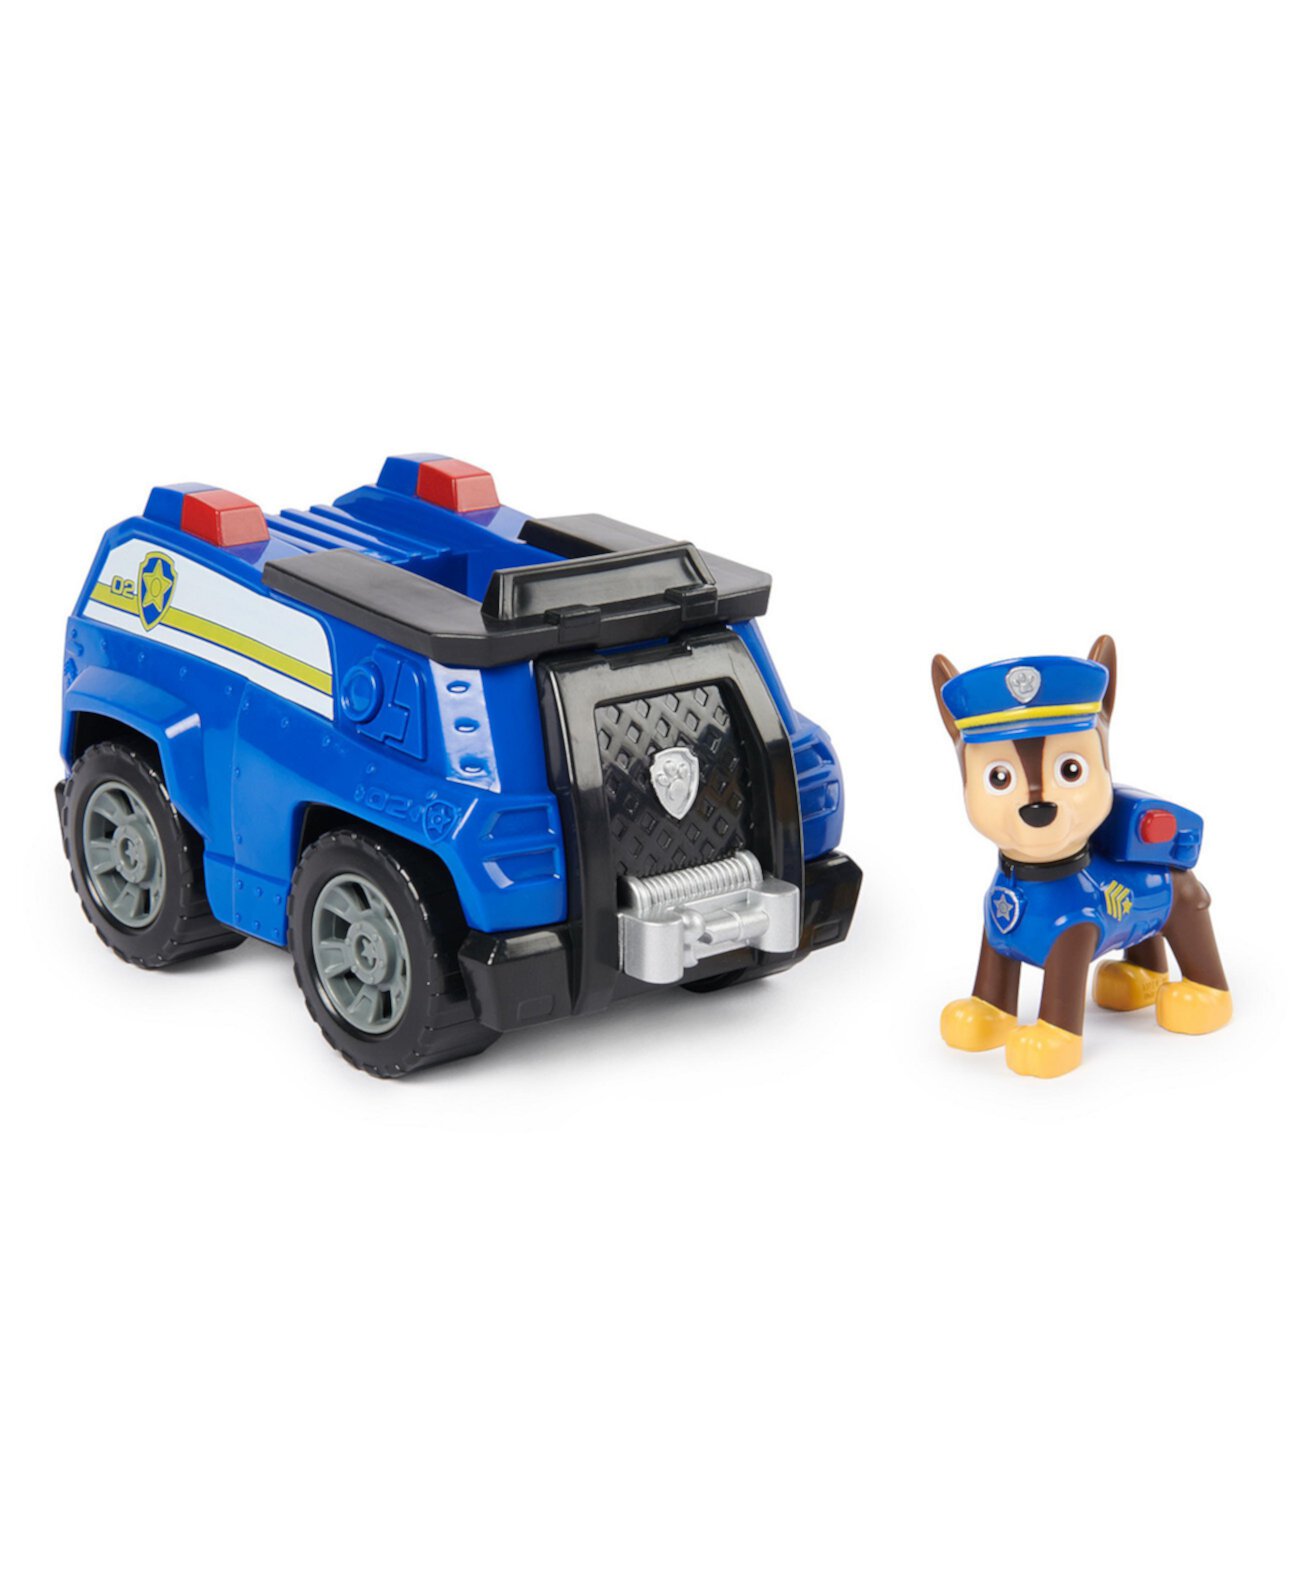 Chase's Patrol Cruiser, Toy Car with Collectible Action Figure, Minded Kids Toys for Boys Girls Ages 3 and Up Paw Patrol